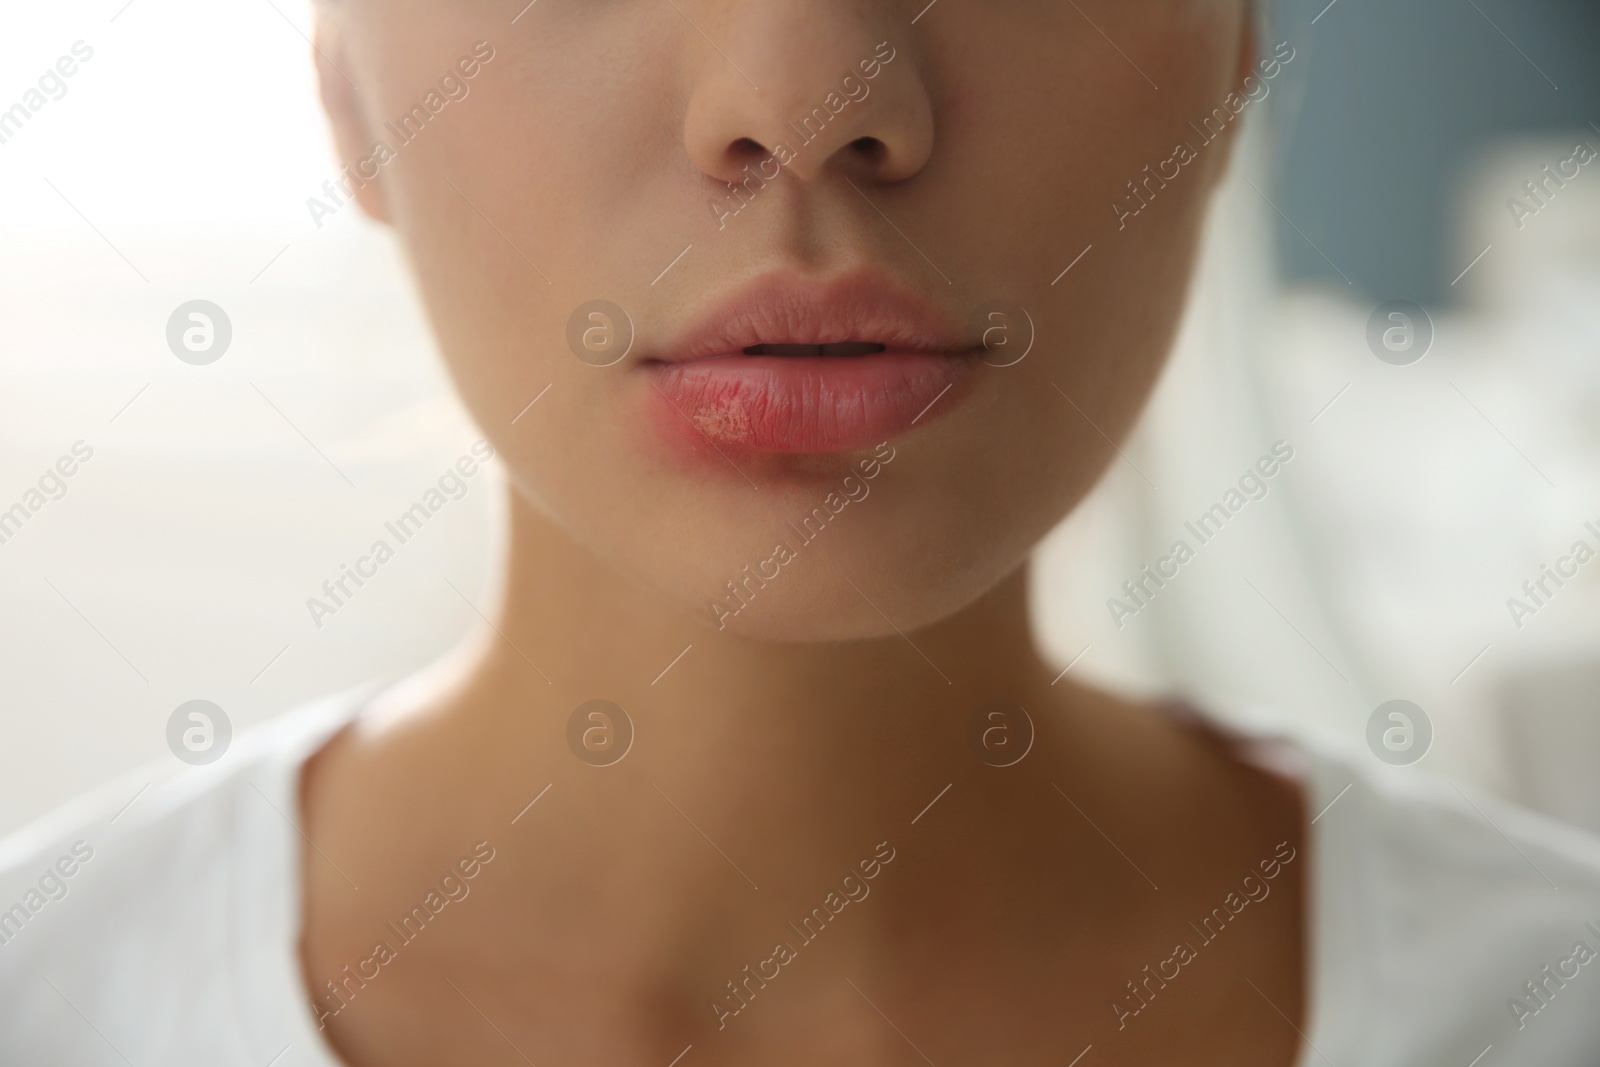 Photo of Woman with herpes on lip against blurred background, closeup